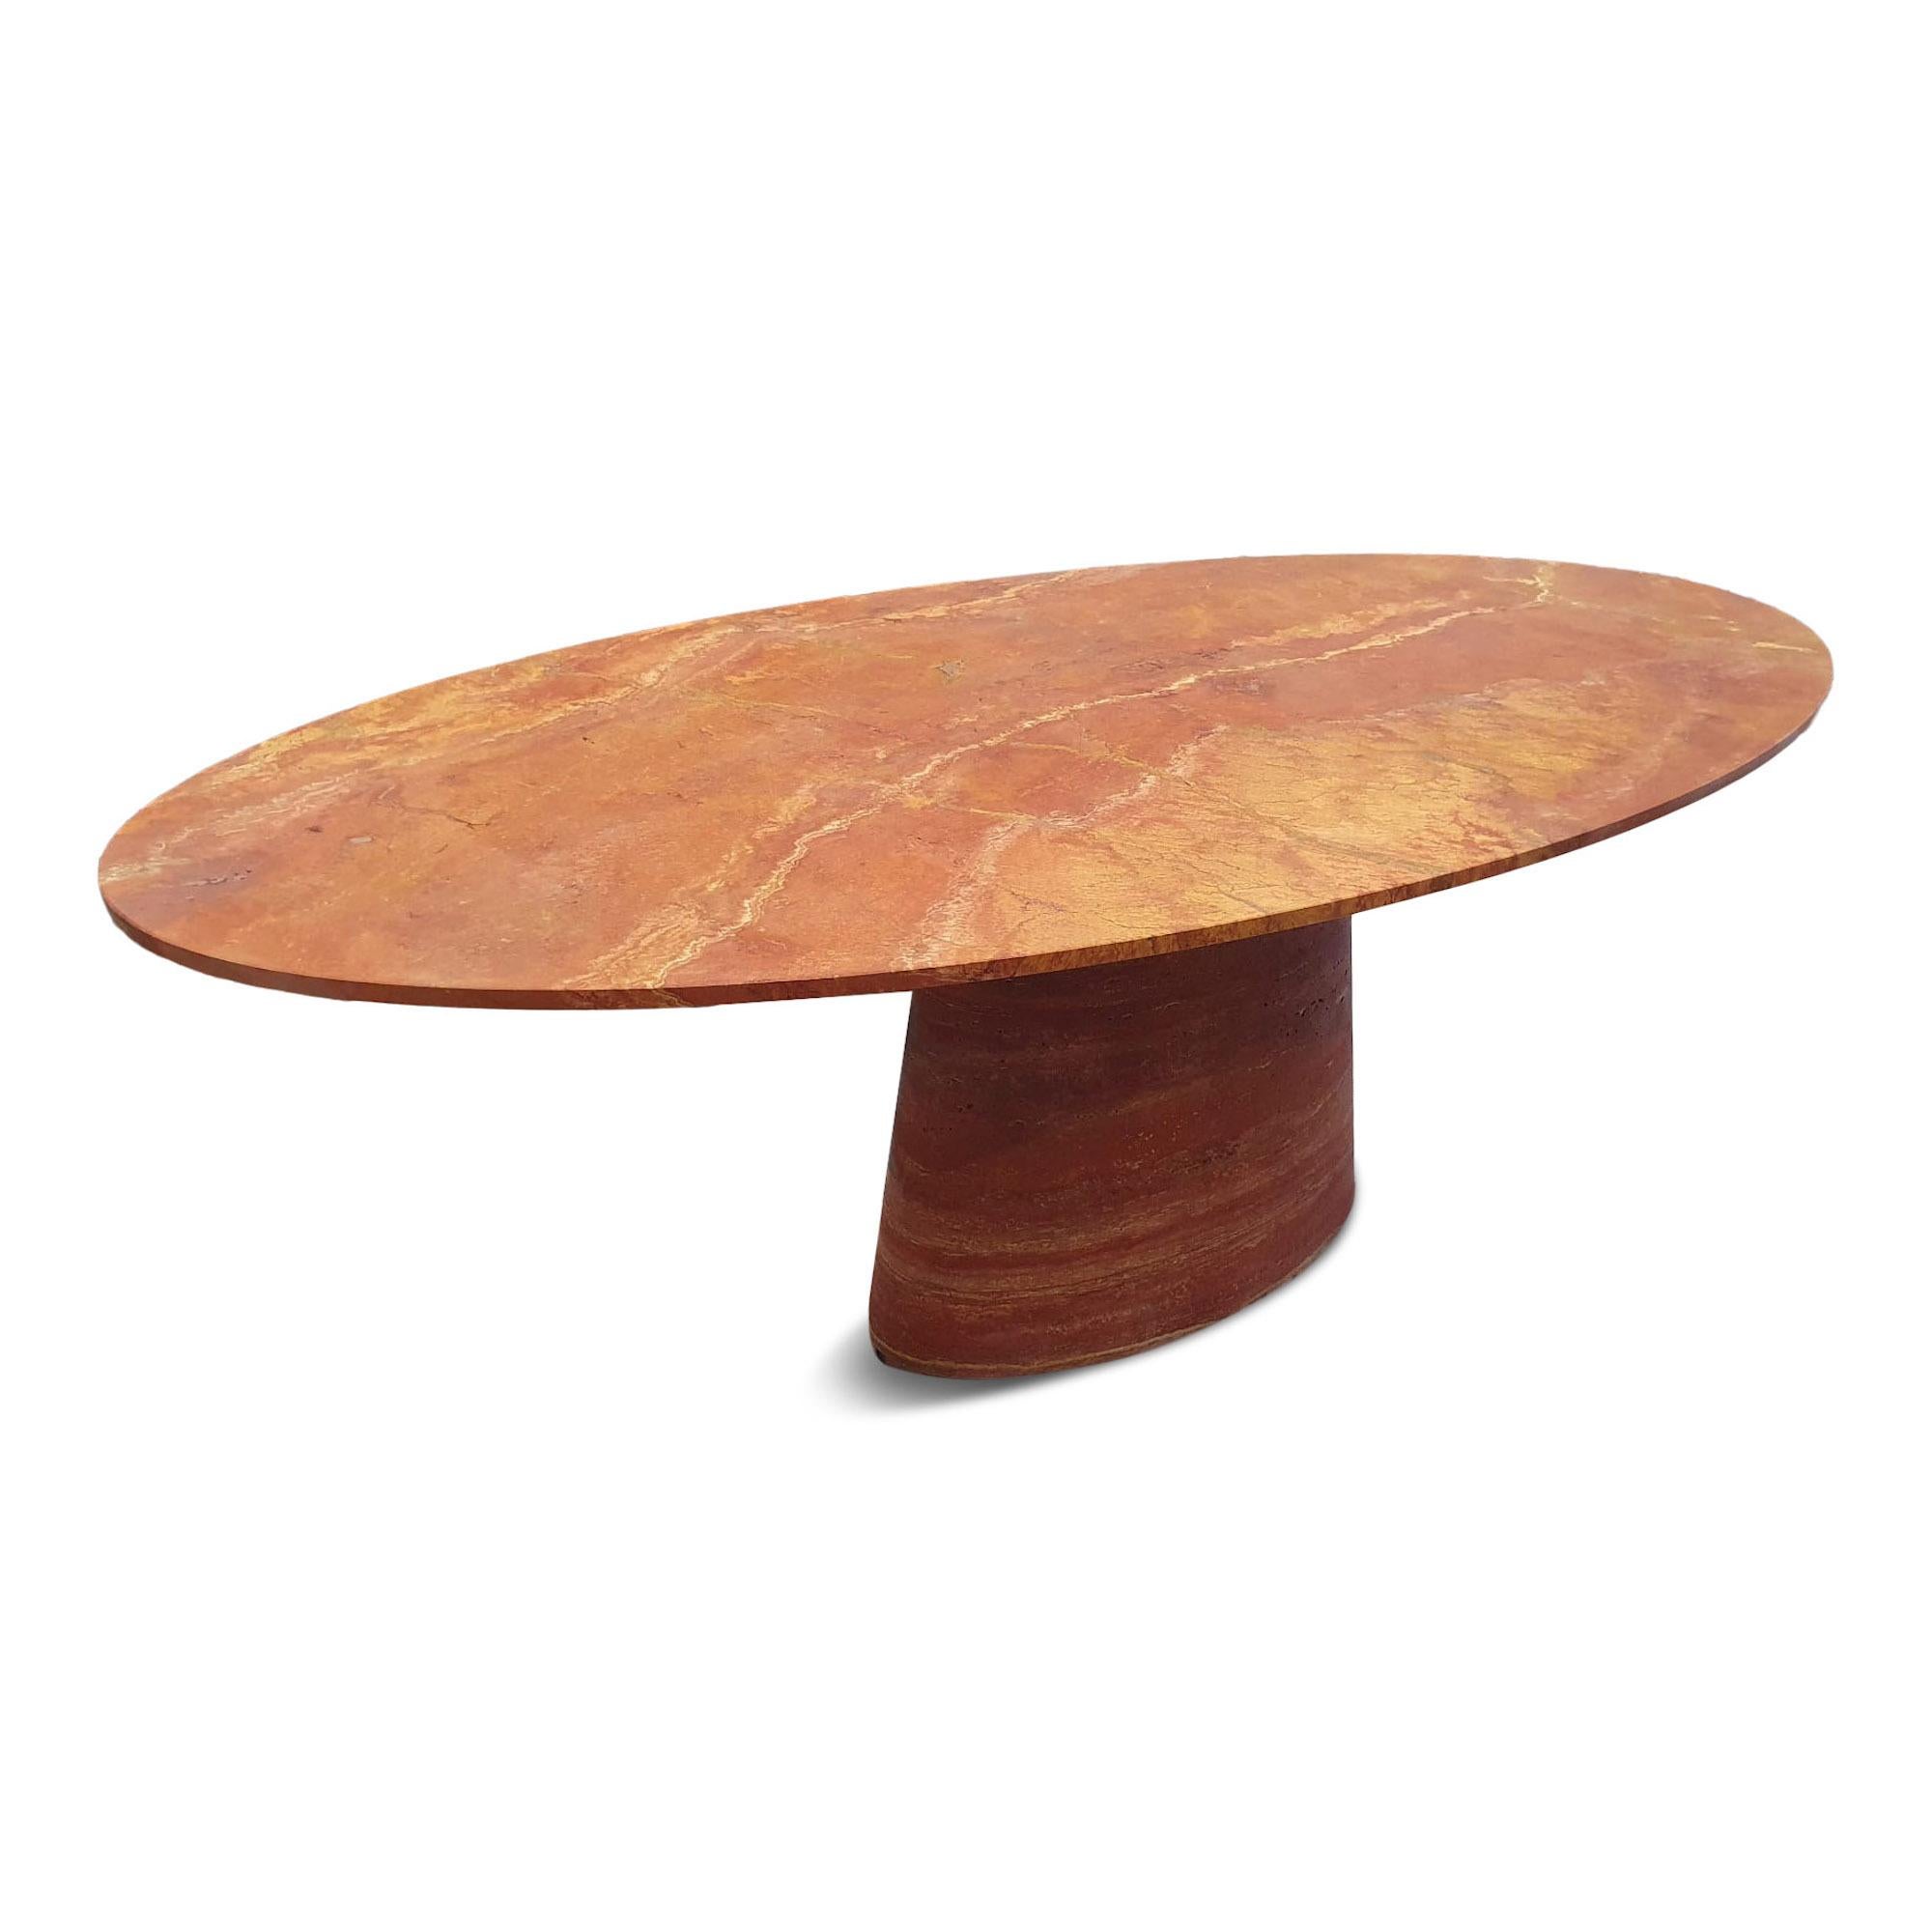 Dining table

Made to order in Italy

Red travertine

Oval top

Tapering oval shaped column base

Size can be customised

Contemporary.